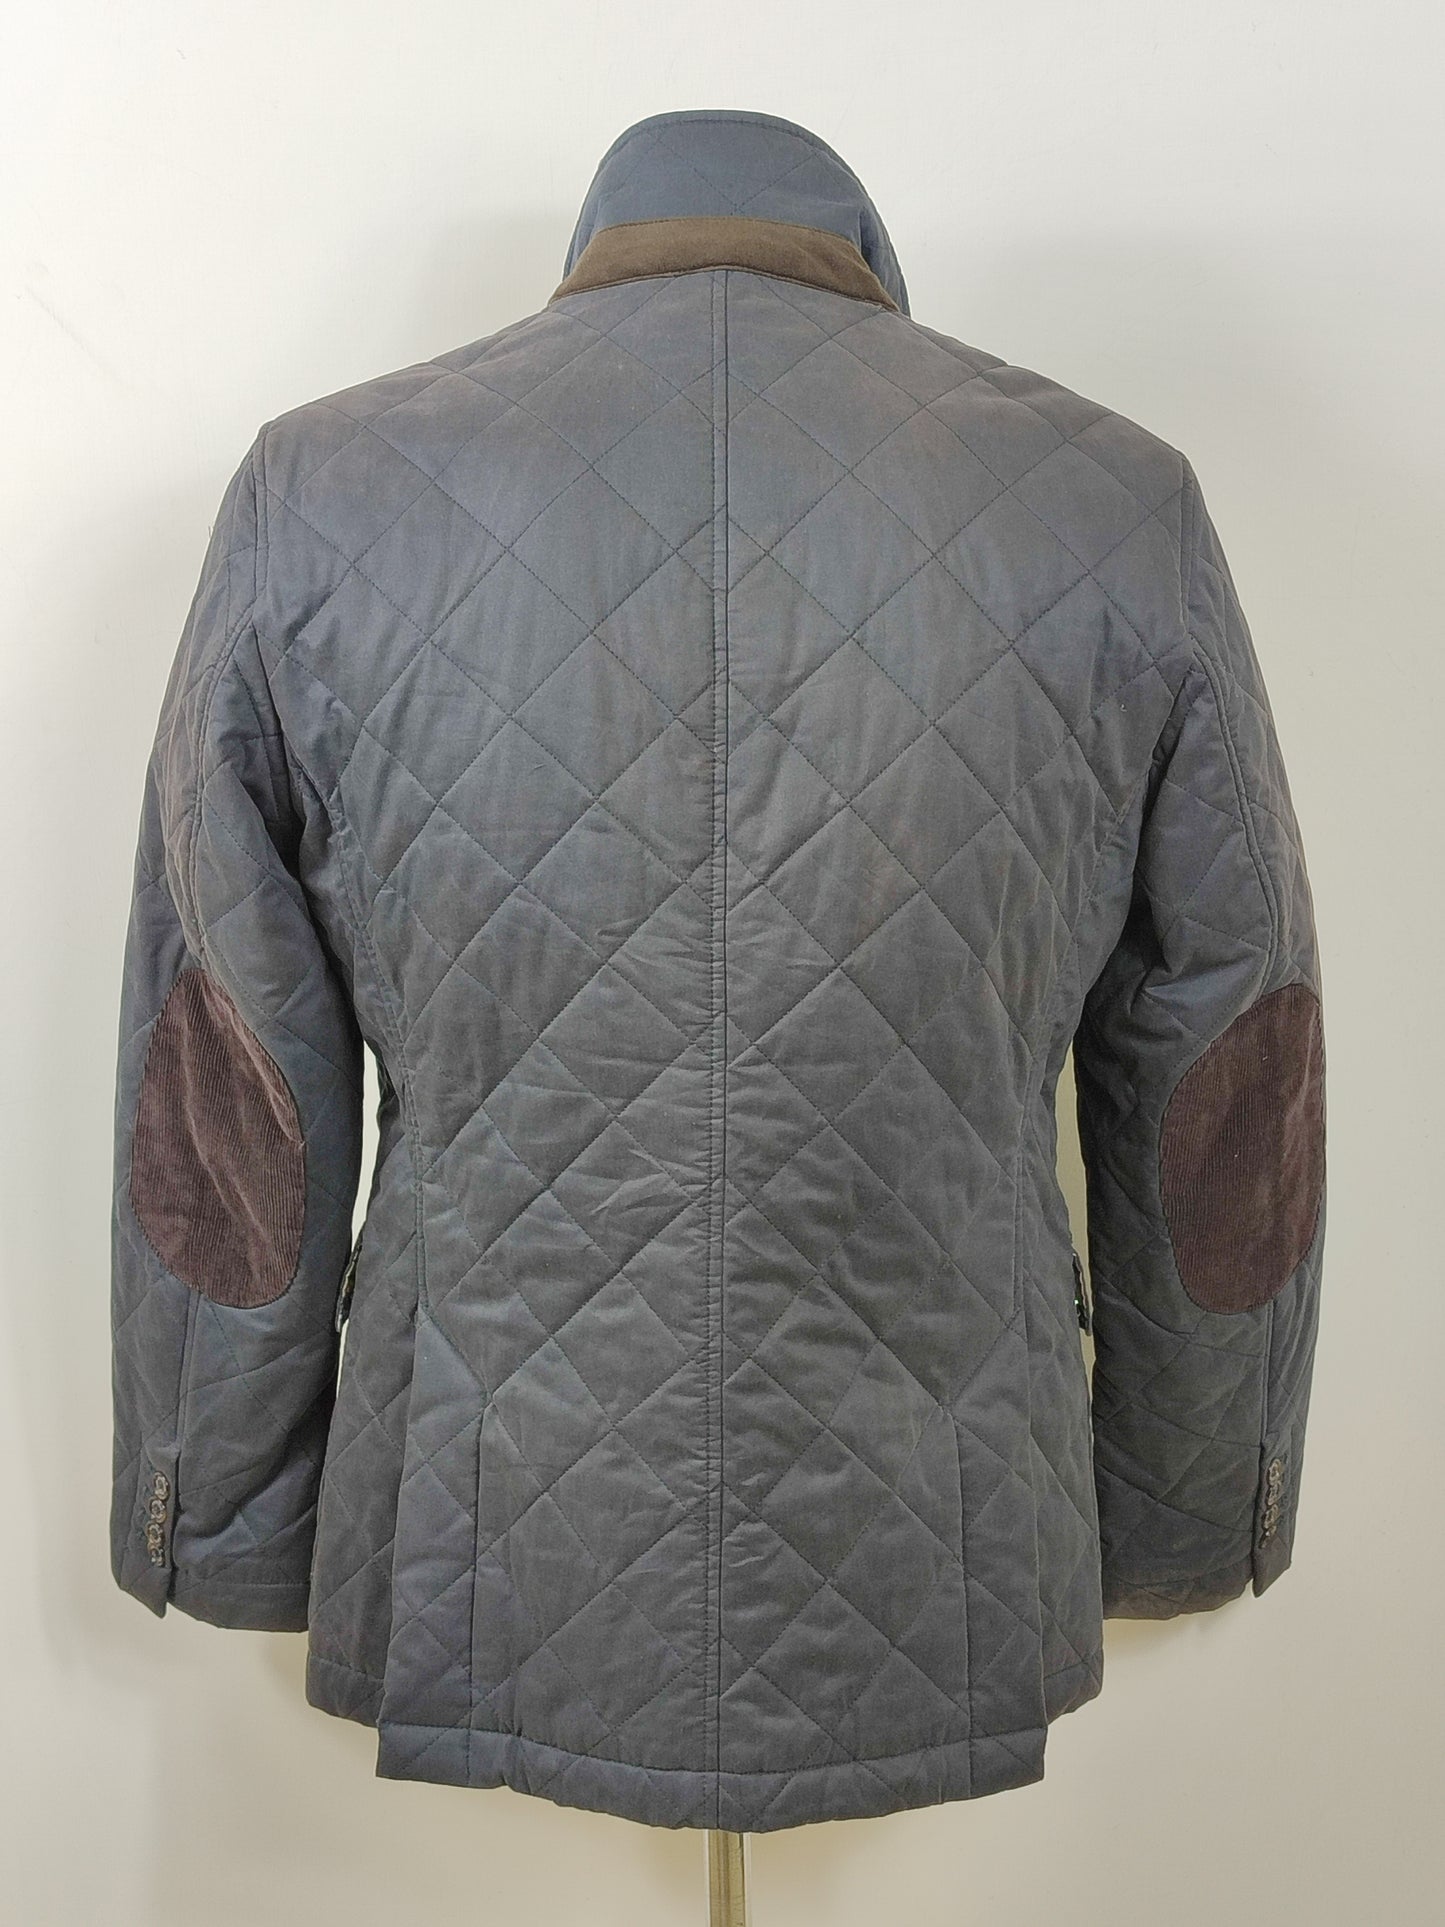 Giacca a vento Barbour Blu Windsor Quilt Medium - Quilted Man Navy Jacket Size Medium